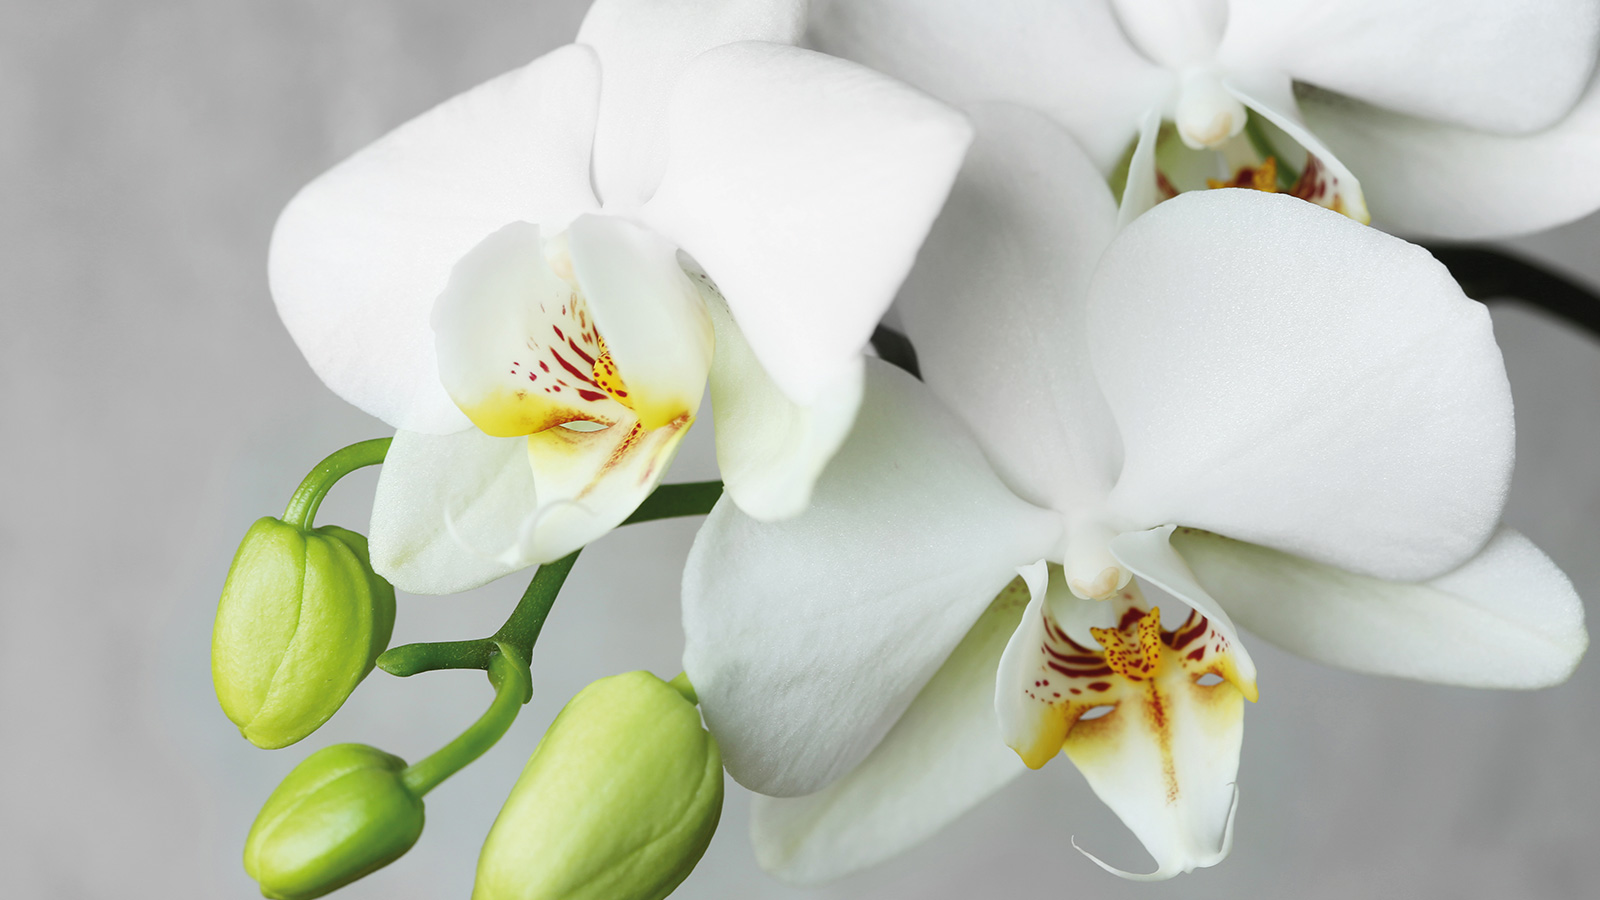 Top 10 DON'Ts when Growing Orchids - tips for orchid beginners 